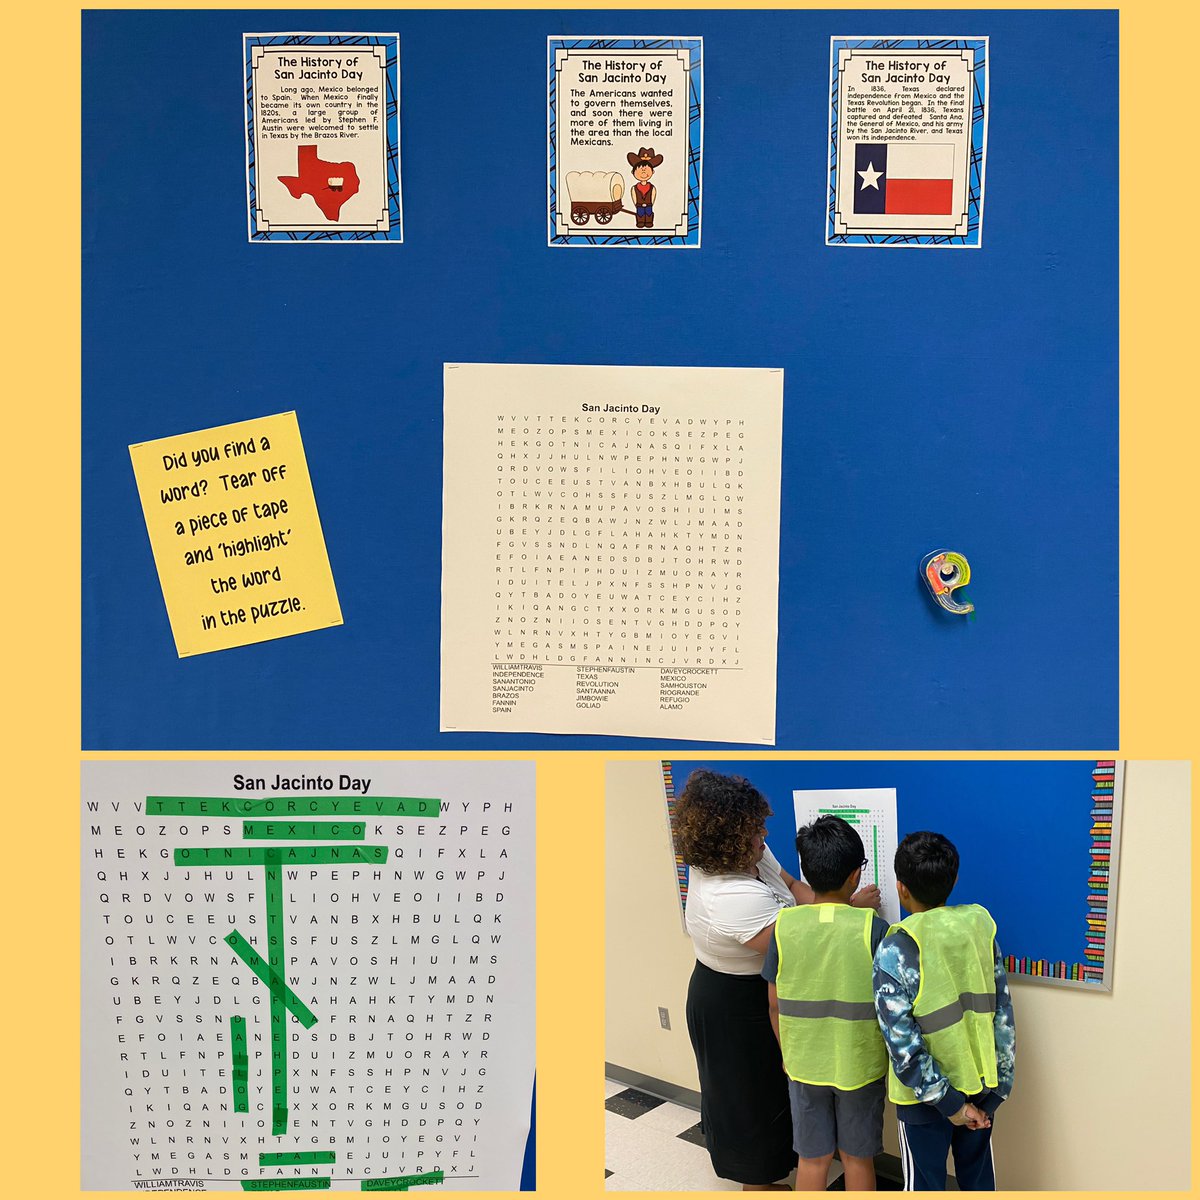 PH Panthers had fun with a word search this week leading up to San Jacinto day. #PearlHallProud #PISDpride #PISDElemSS